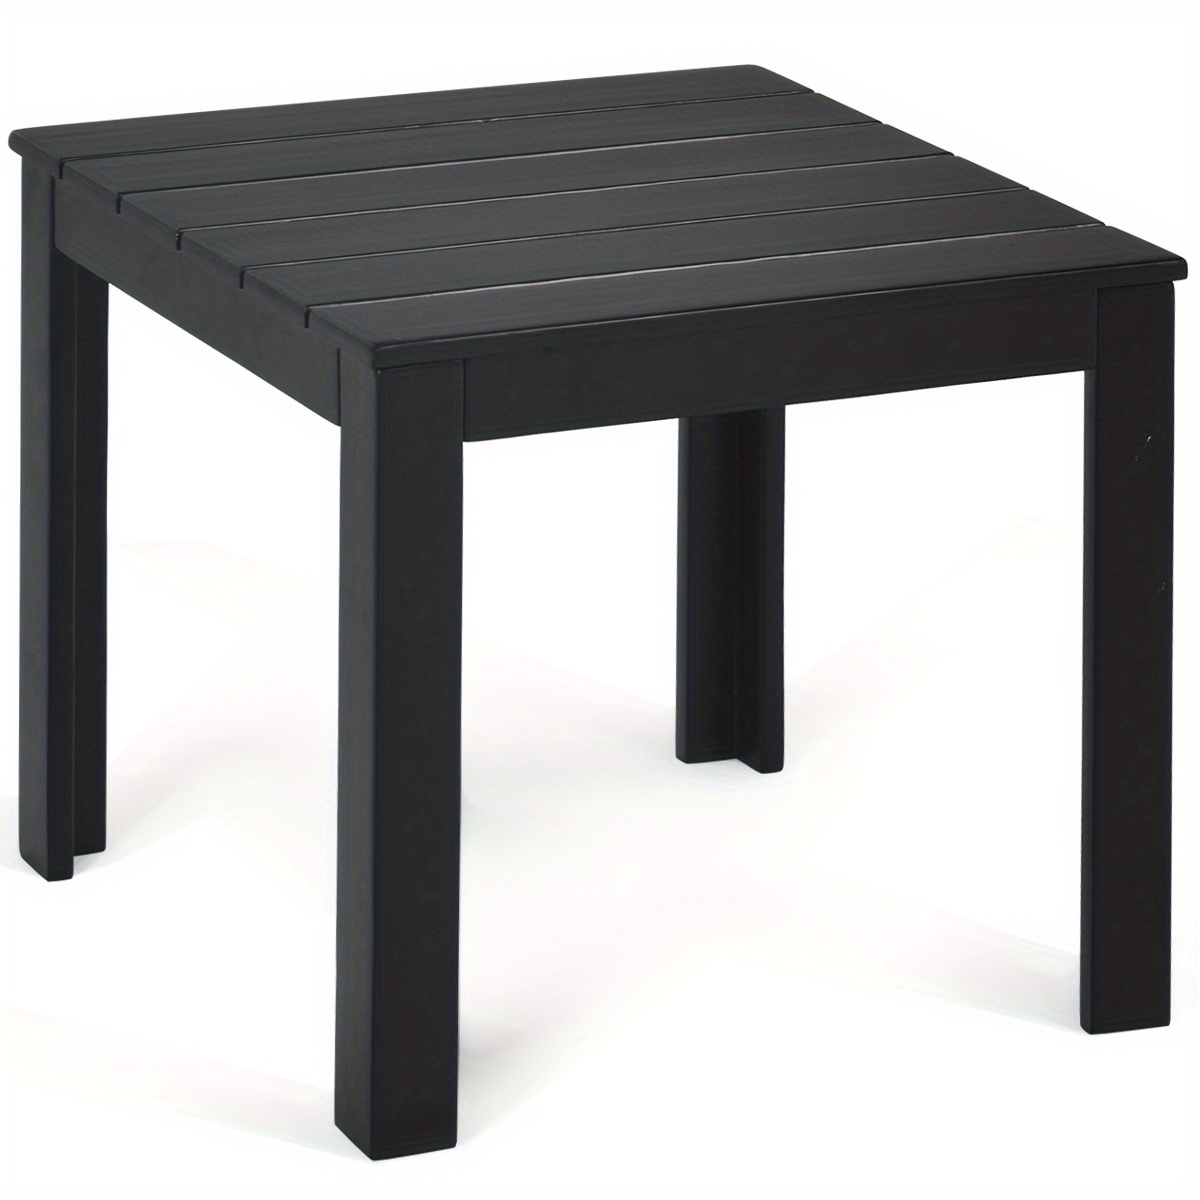 

Maxmass Wooden Square Side End Table Patio Coffee Bistro Table Indoor Outdoor Black